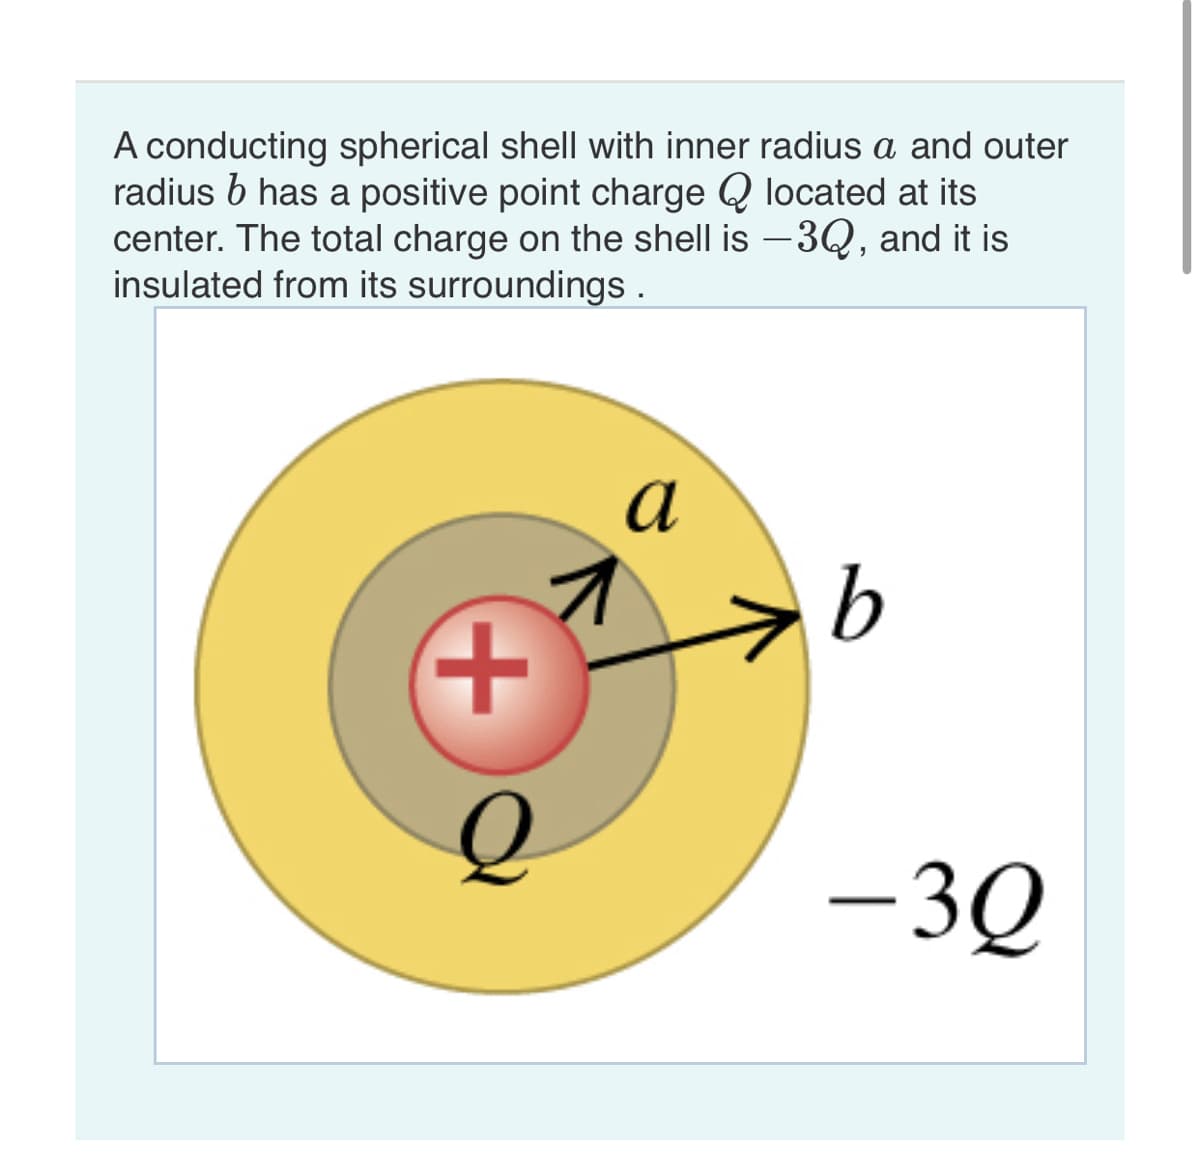 A conducting spherical shell with inner radius a and outer
radius b has a positive point charge located at its
center. The total charge on the shell is -3Q, and it is
insulated from its surroundings.
+
a
b
-30